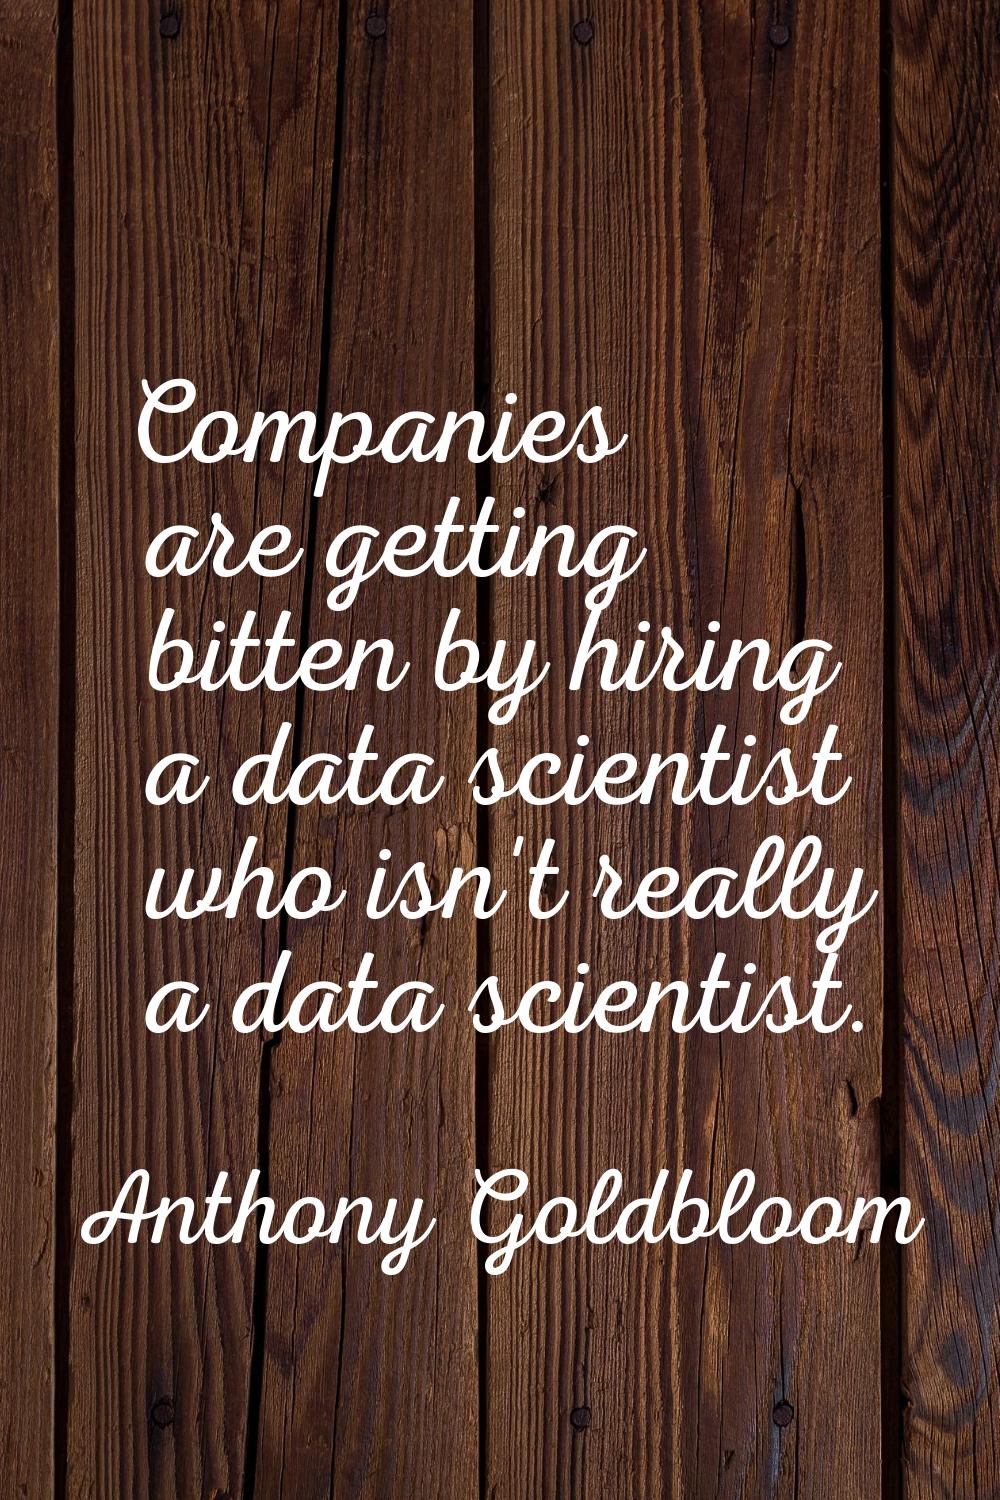 Companies are getting bitten by hiring a data scientist who isn't really a data scientist.